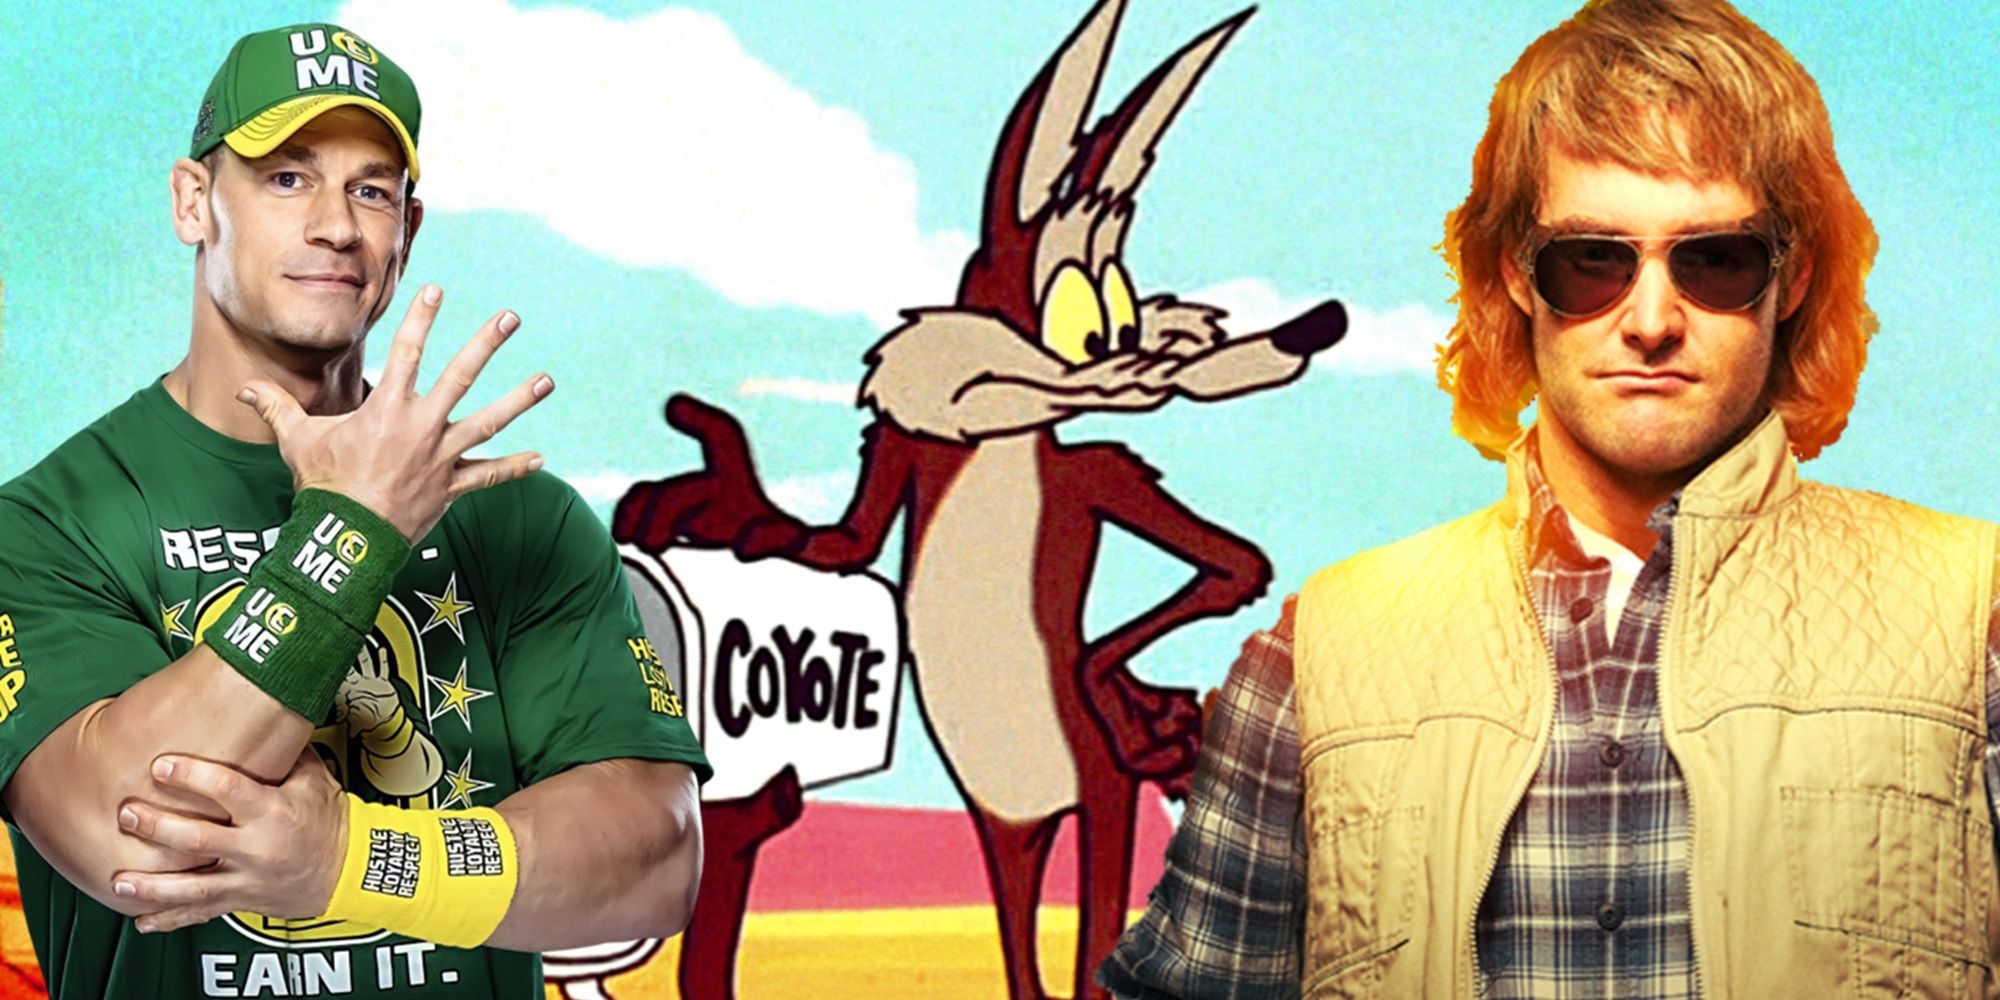 Collage of John Cena, Wile E Coyote, and MacGruber